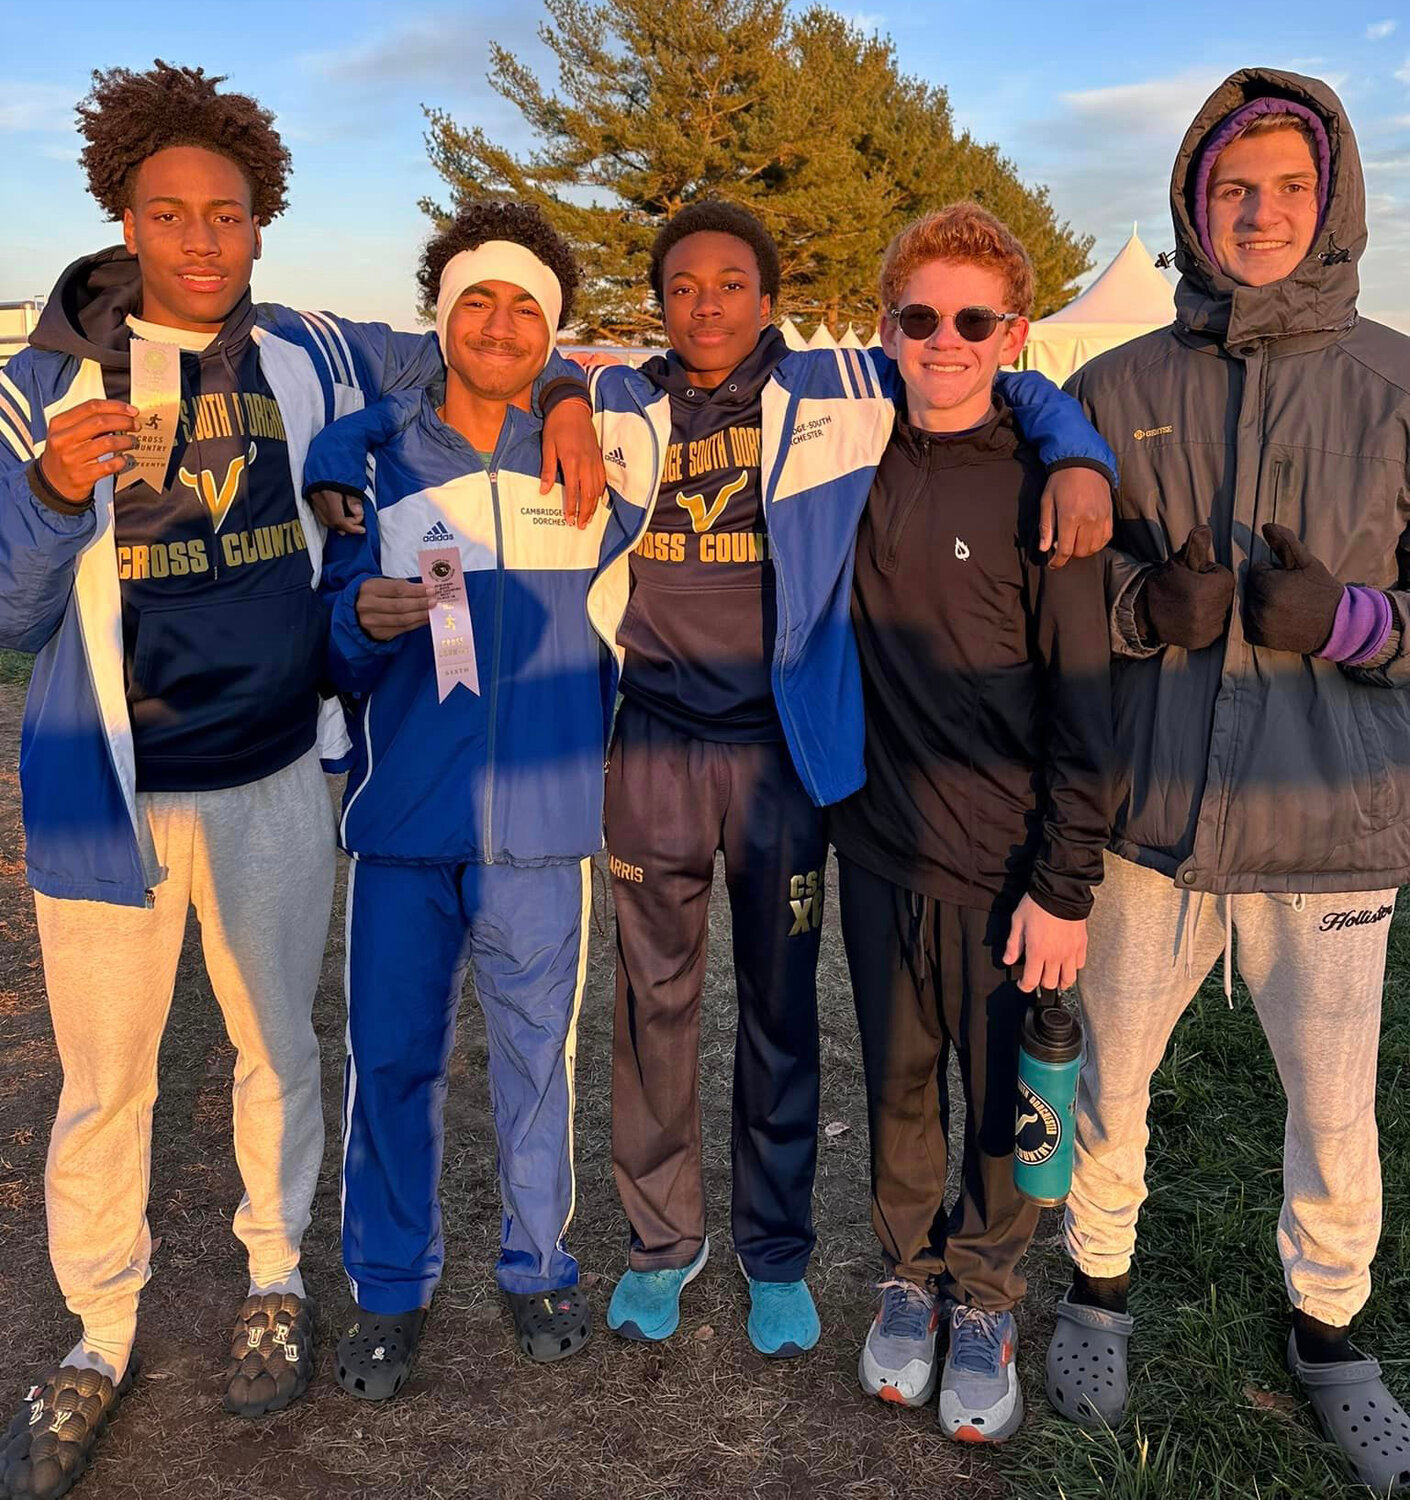 All Cambridge-South Dorchester High School cross country runners who competed in the Region 1A East Championships in Elkton on Thursday qualified for the state finals. From the left are Zy'Meir WIlson, Tekai Drummond, Josiah Harris, Andrew Albert and Preston Adkins.